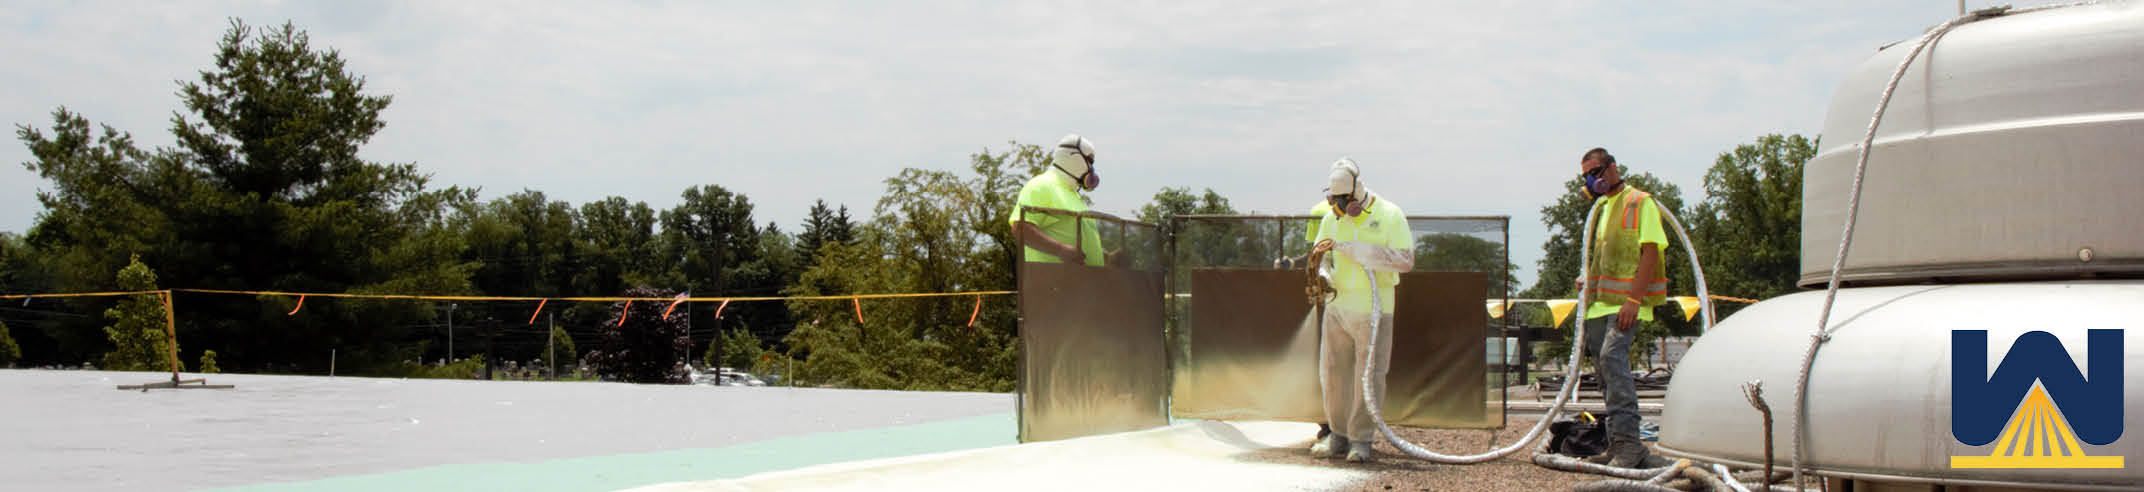 7 Problems of Spray Foam Roofing Systems